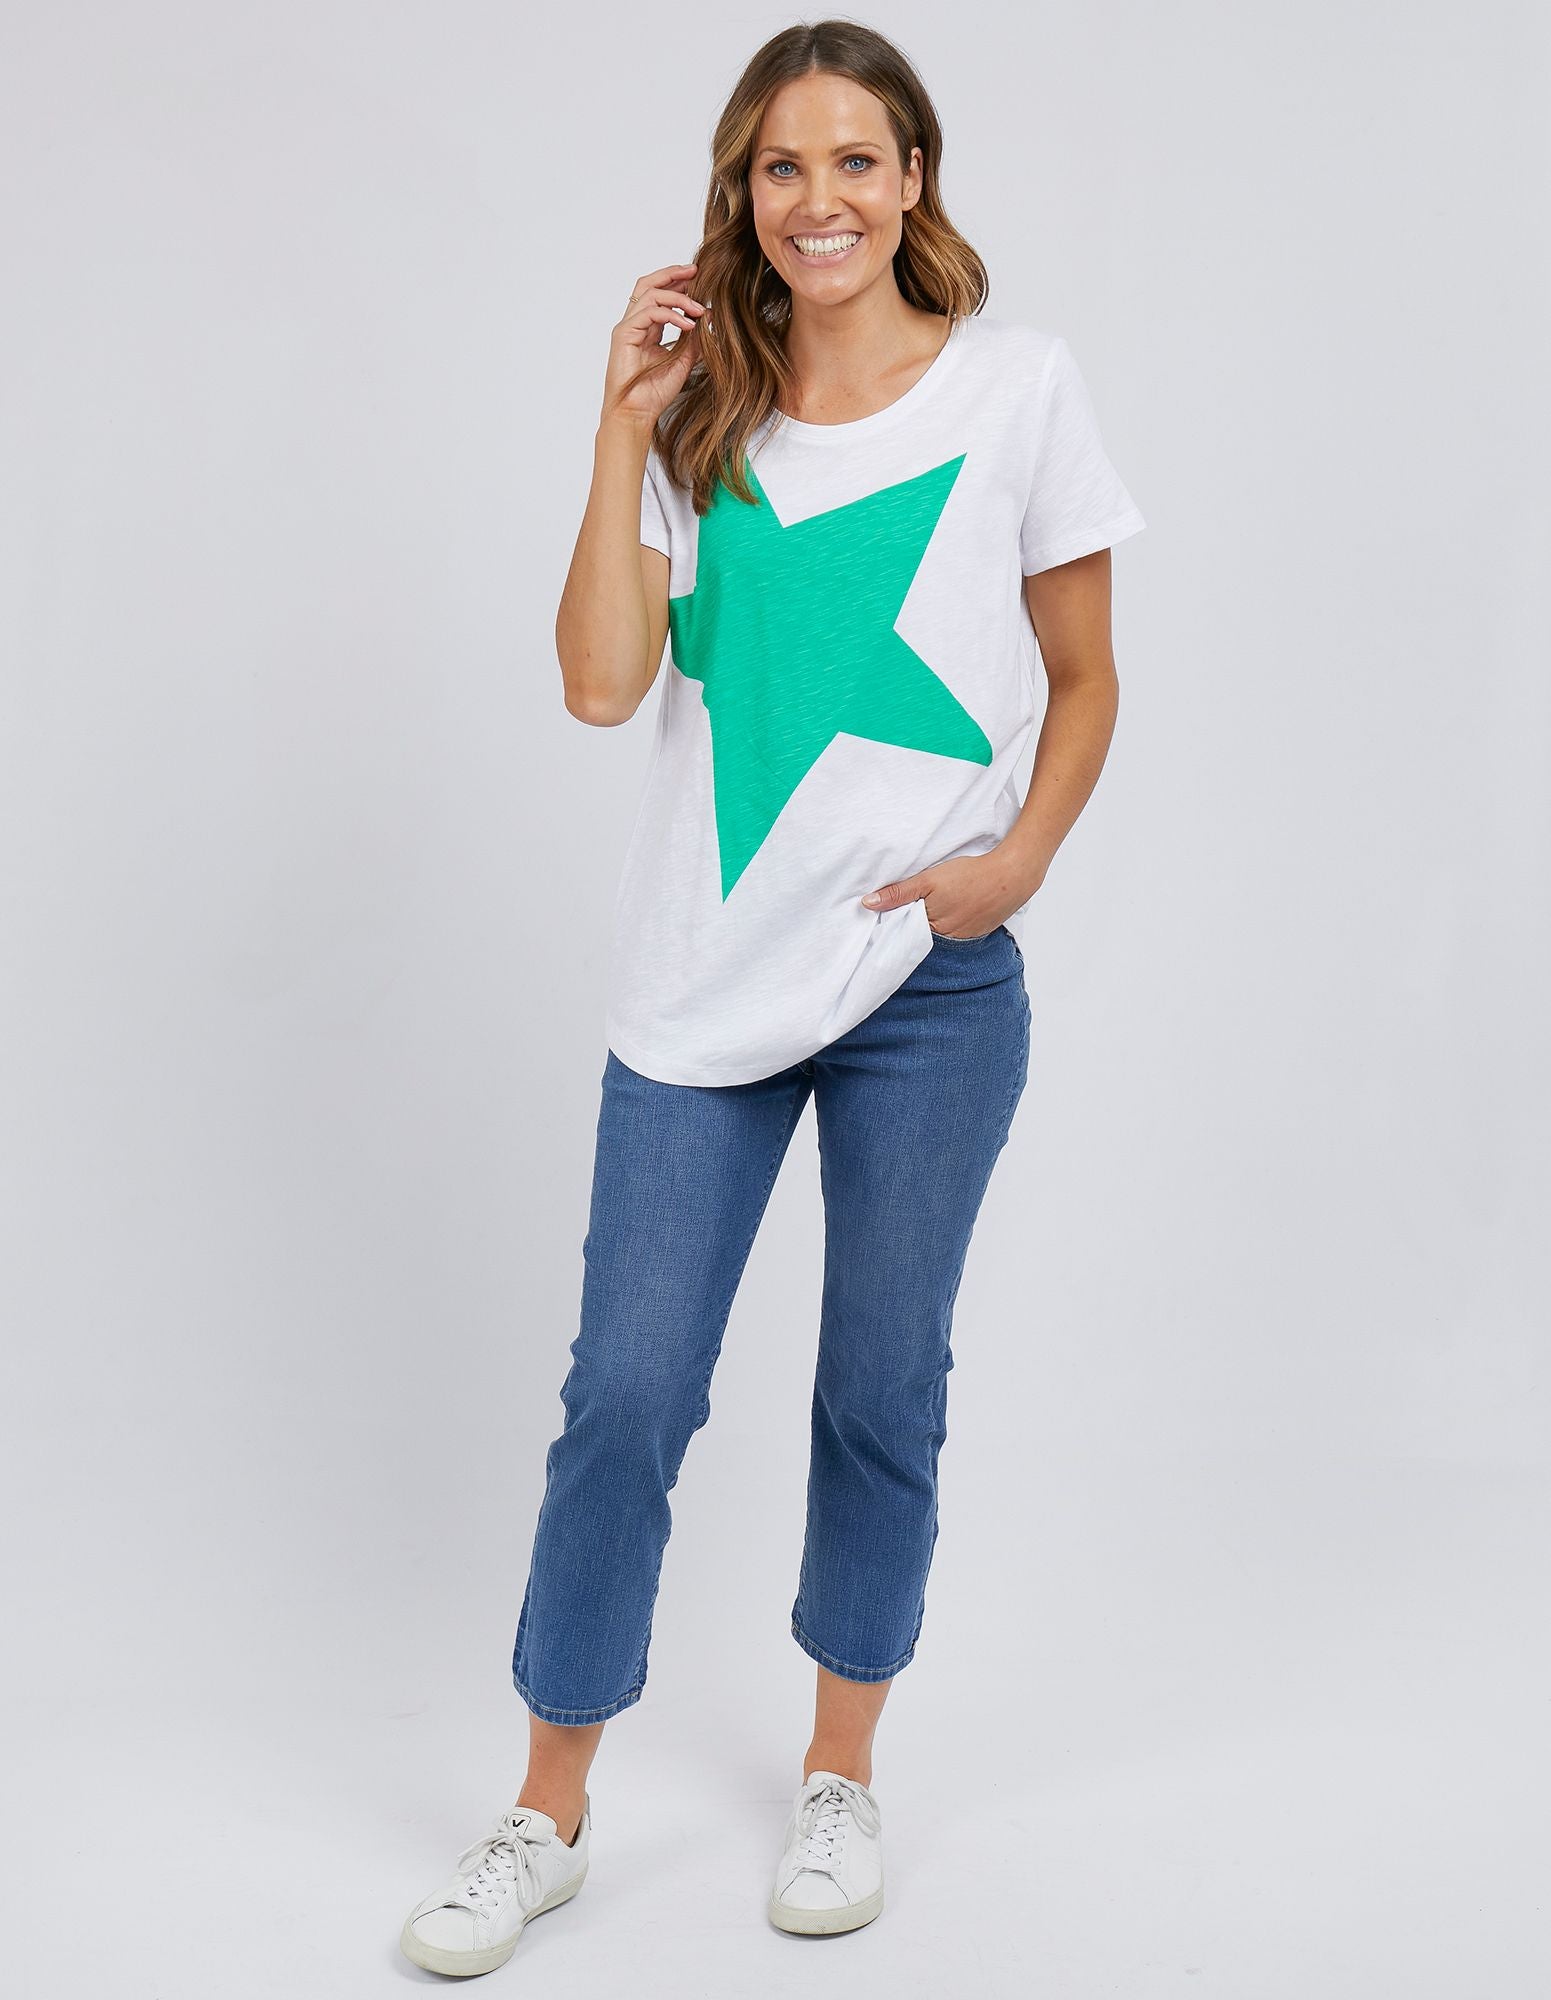 Super Star Tee - White / Green Star - Elm Lifestyle - FUDGE Gifts Home Lifestyle